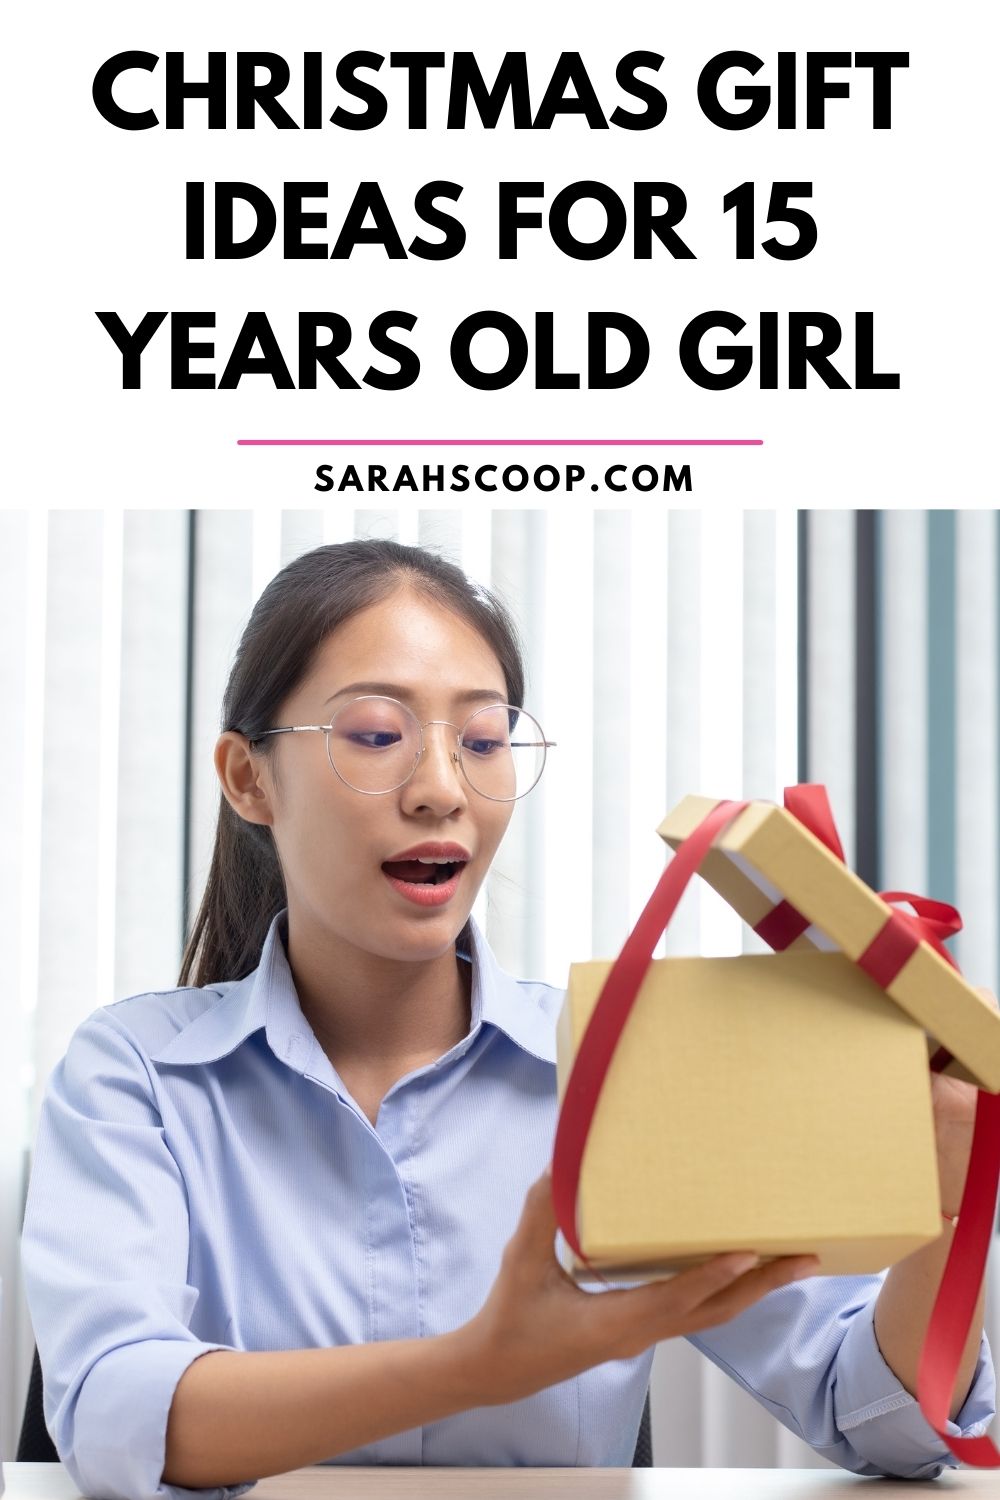 Best Gifts For Teenage Girls: Birthday Gift Ideas & More | Popular Science